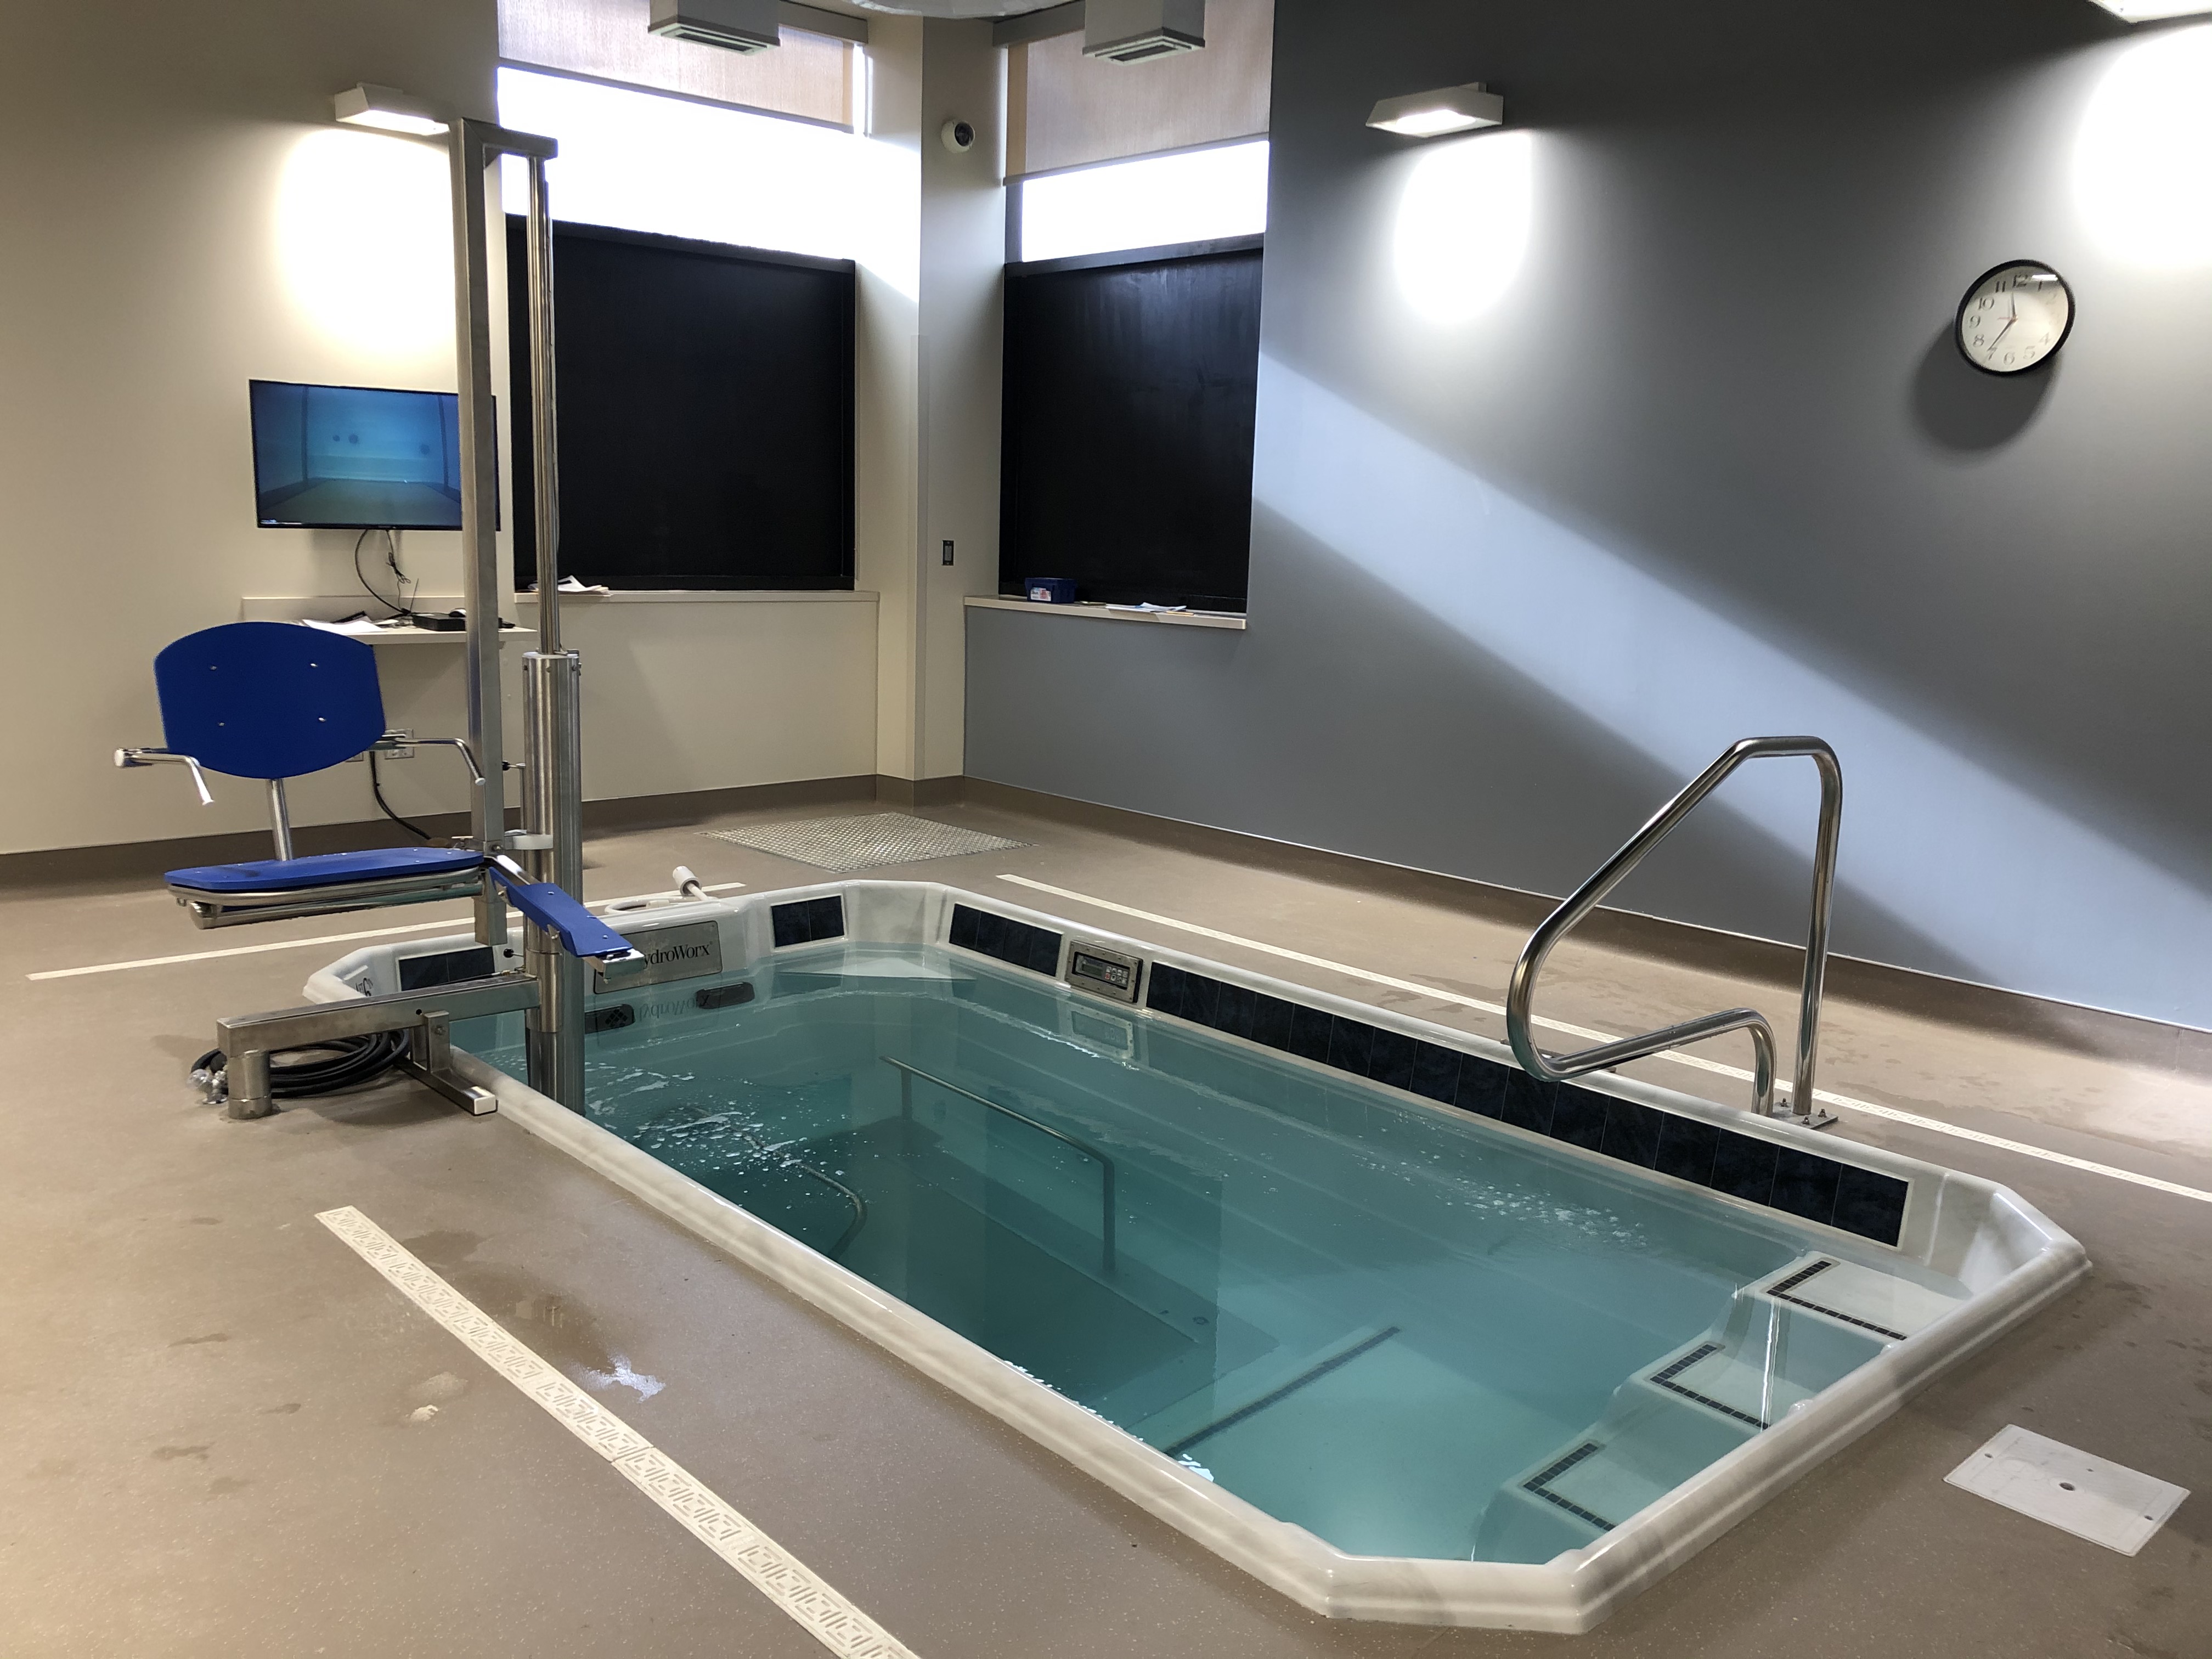 500 Series pool room with chair lift